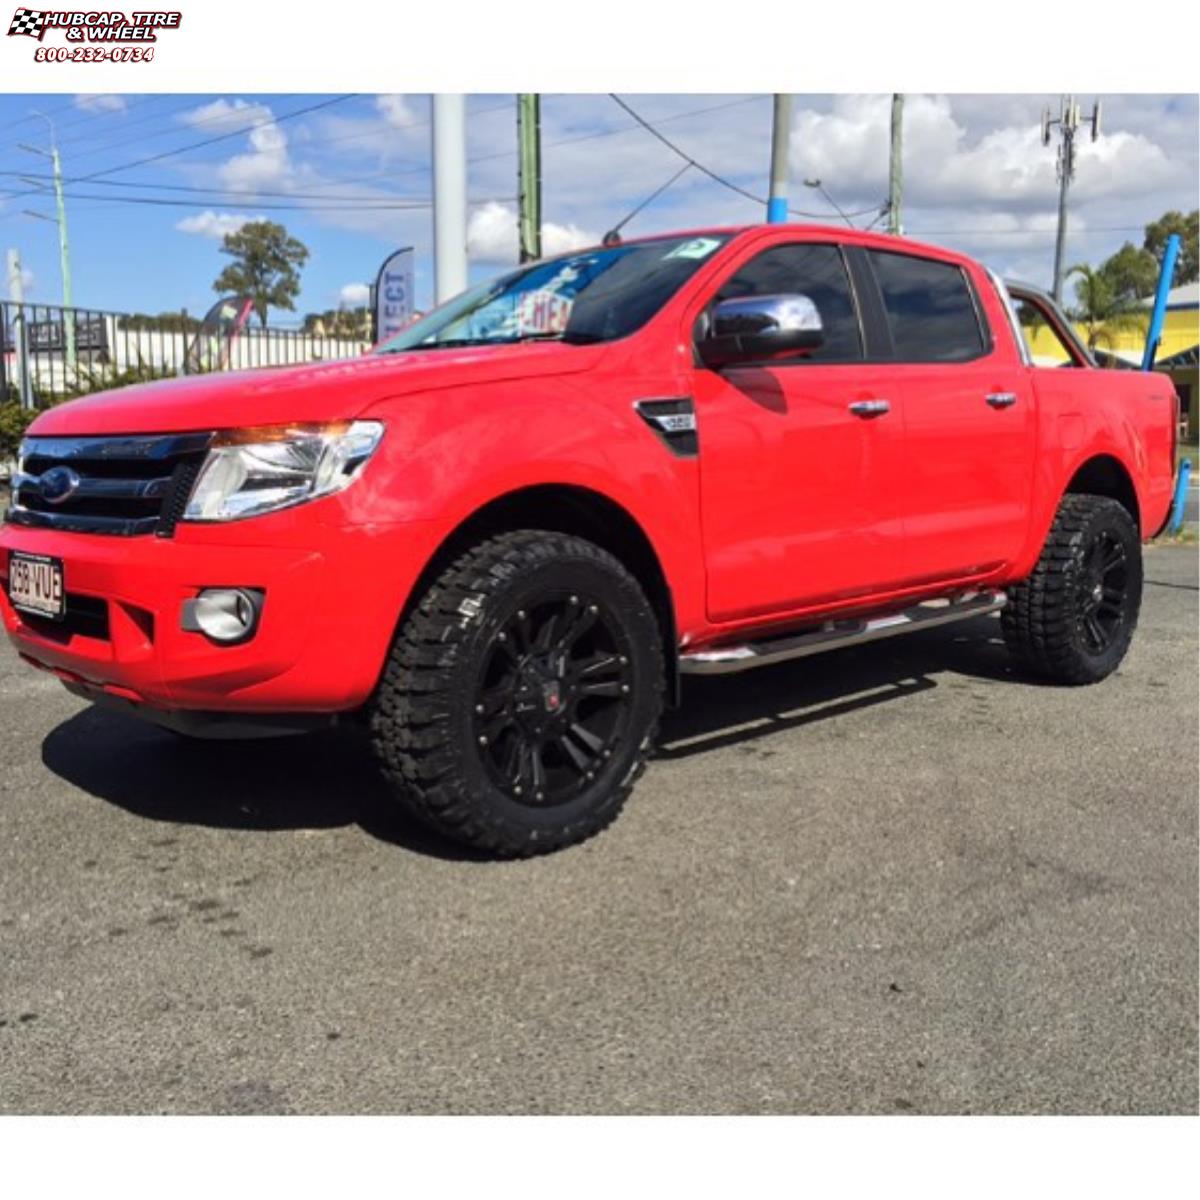 vehicle gallery/toyota hilux xd series xd778 monster x  Matte Black wheels and rims